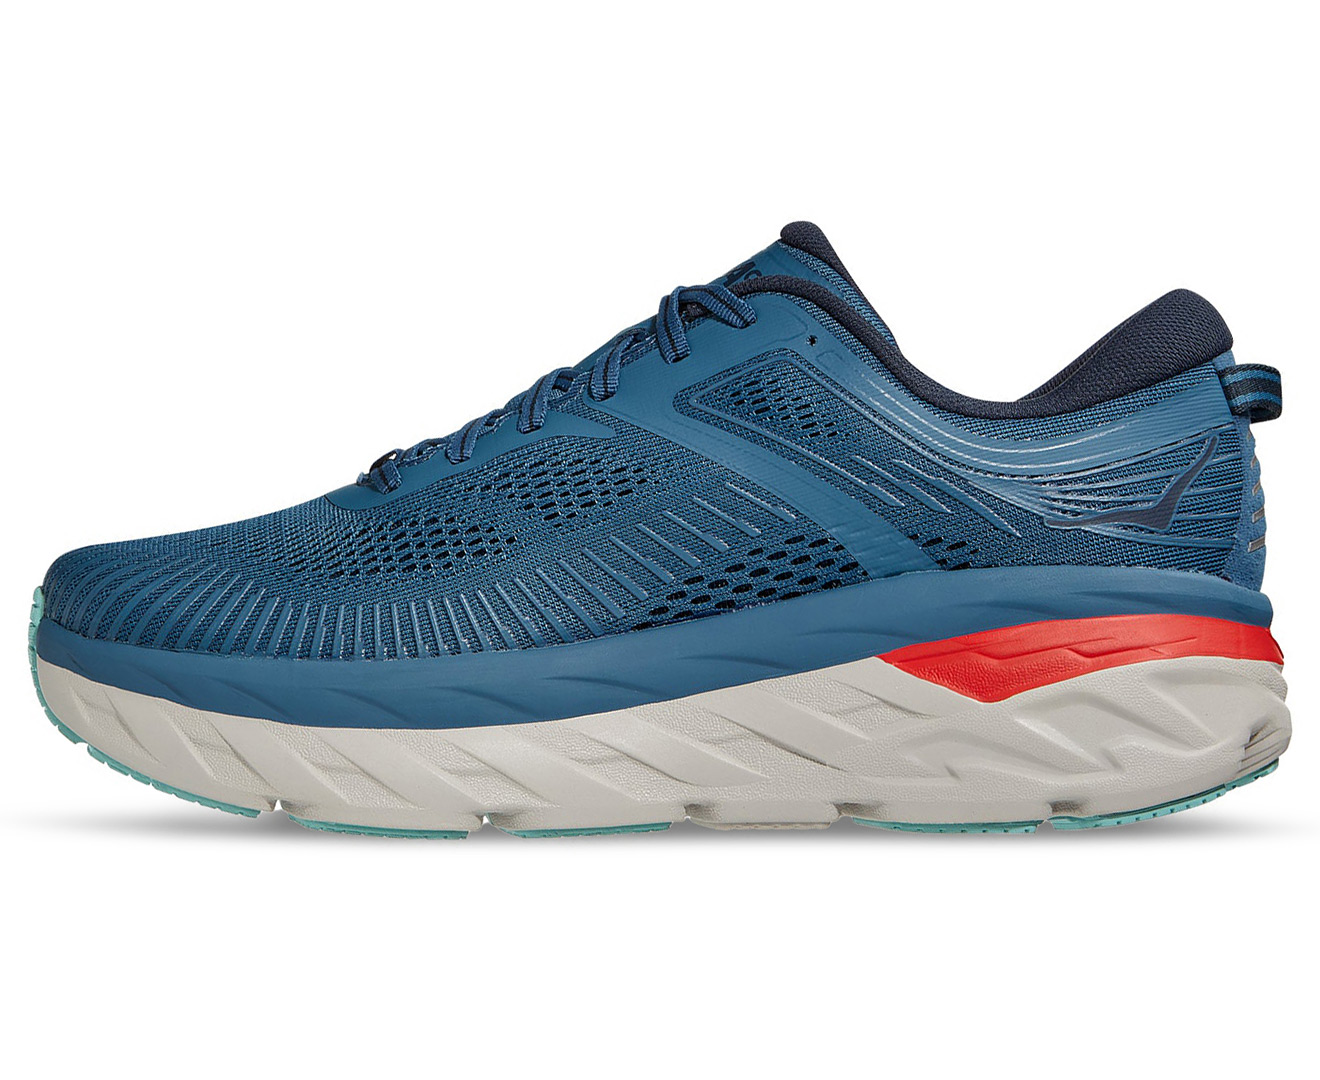 Hoka One One Men's Bondi 7 Running Shoes - Real Teal/Outer Space ...